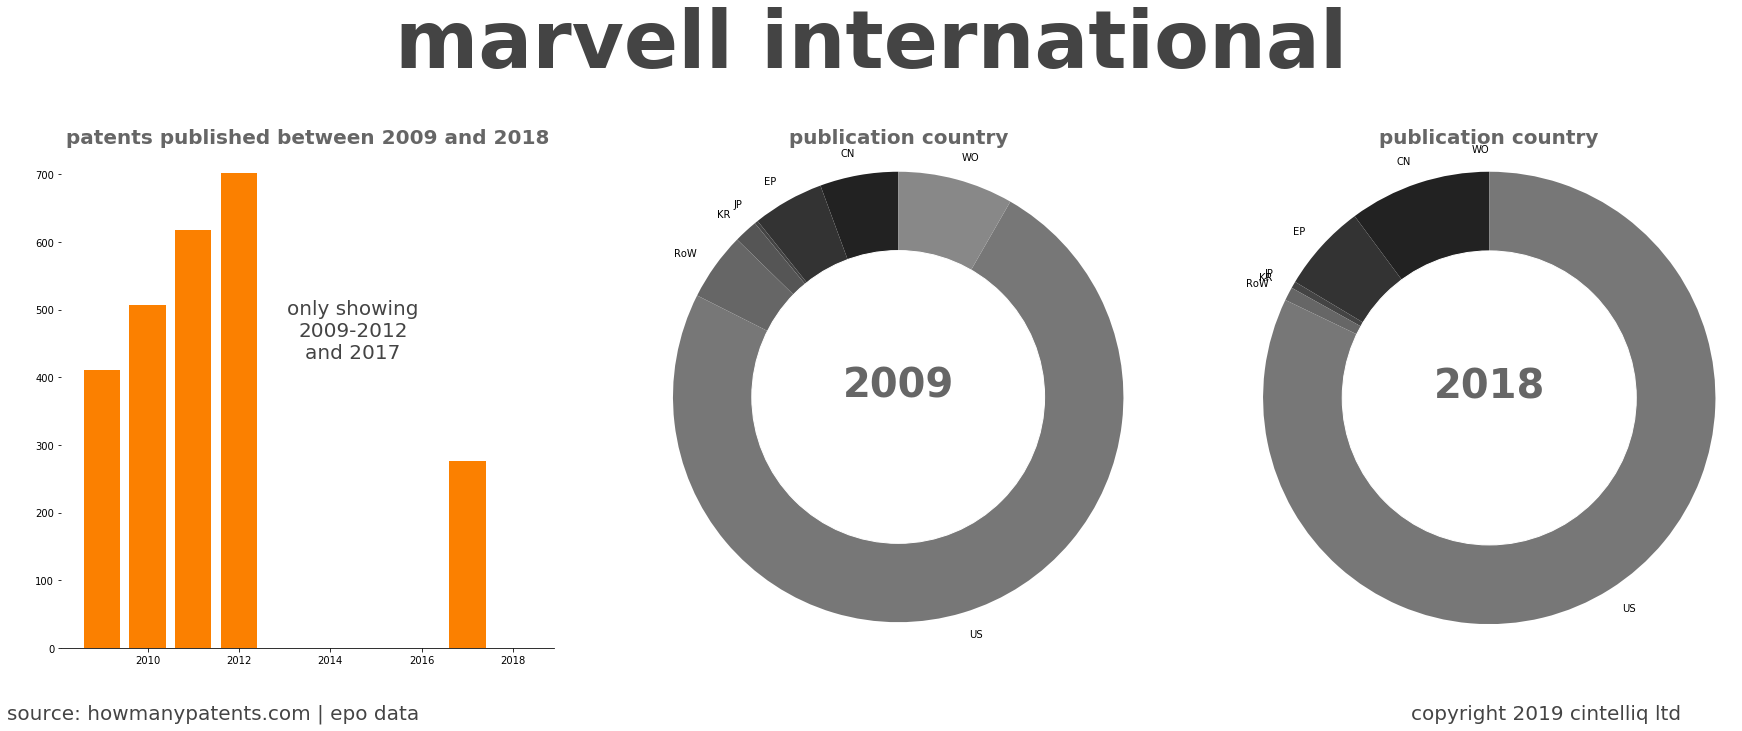 summary of patents for Marvell International